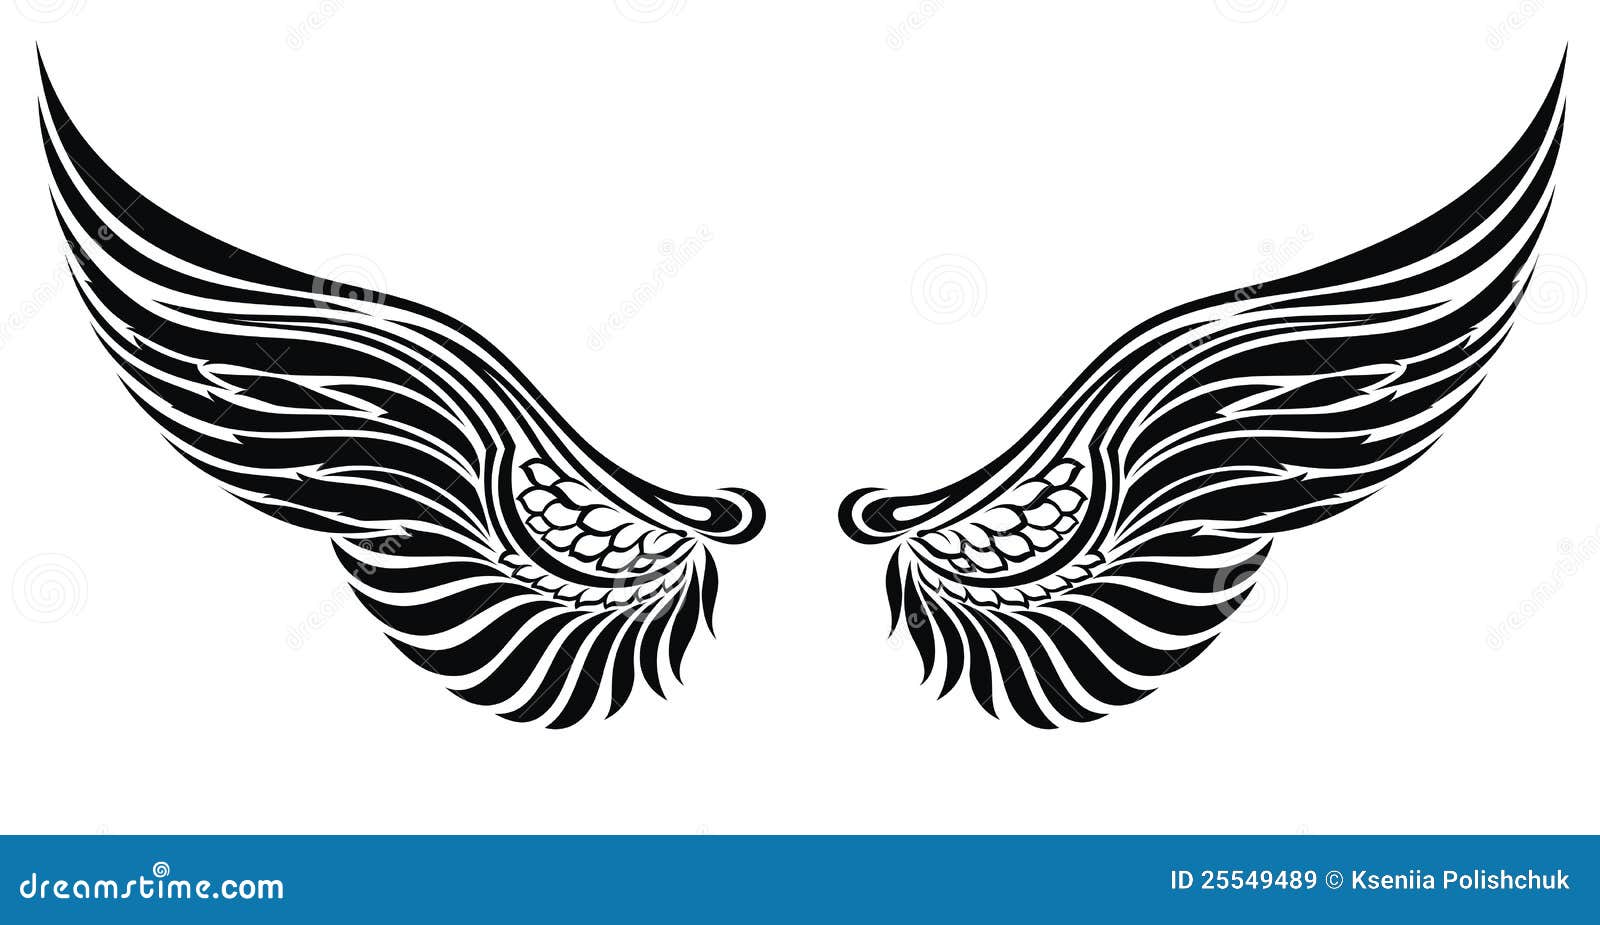 Royalty Free Stock Images: Angel wings isolated on white.Tattoo design